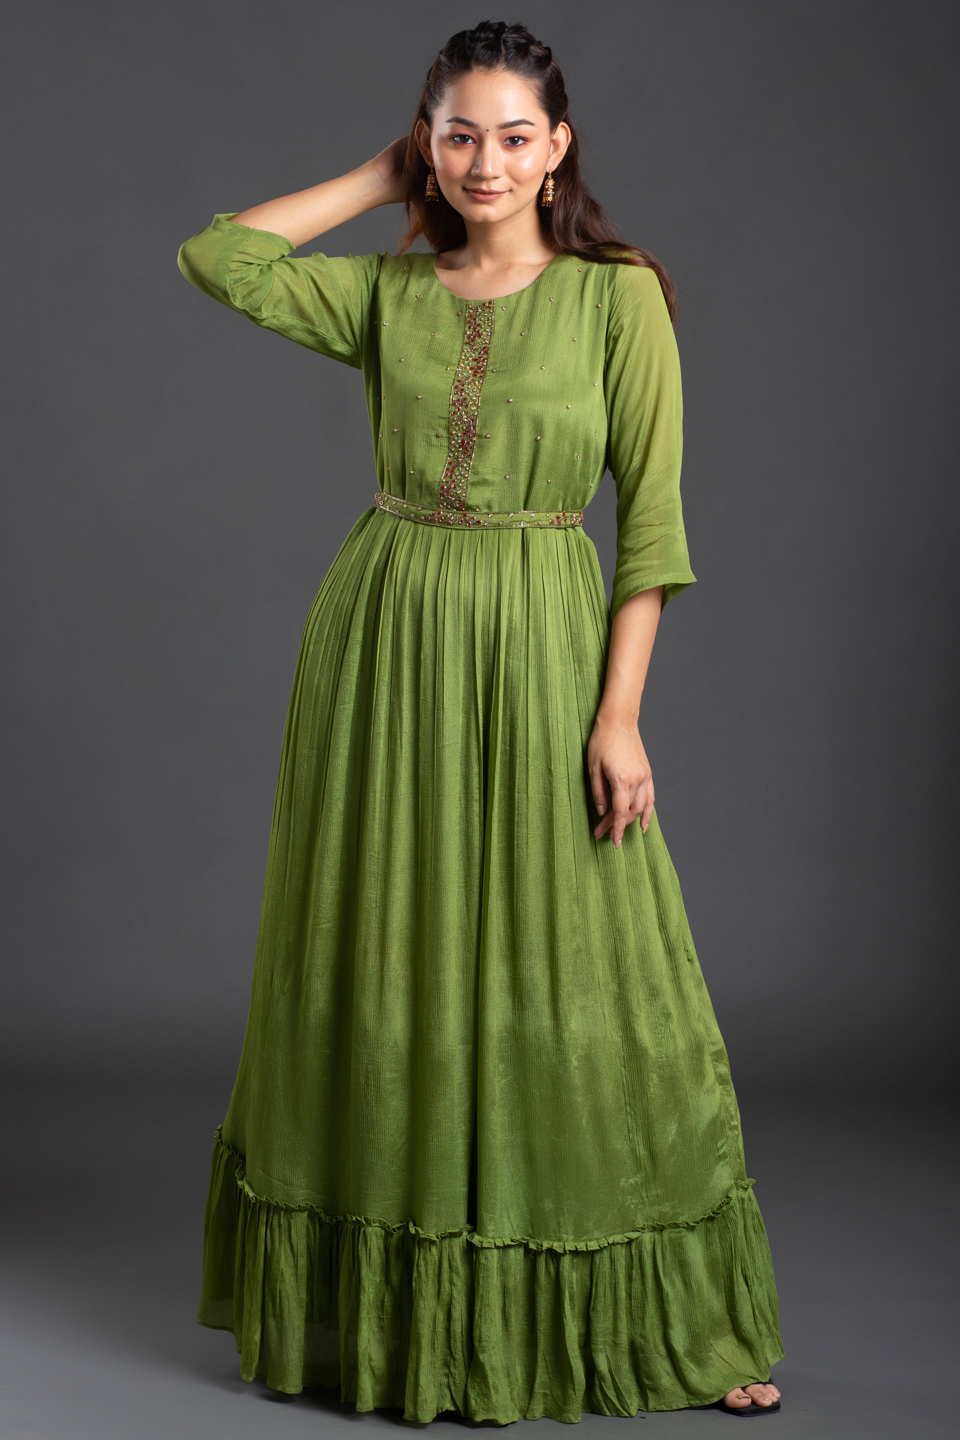 GREEN GOWN WITH PEPLUM FLARE